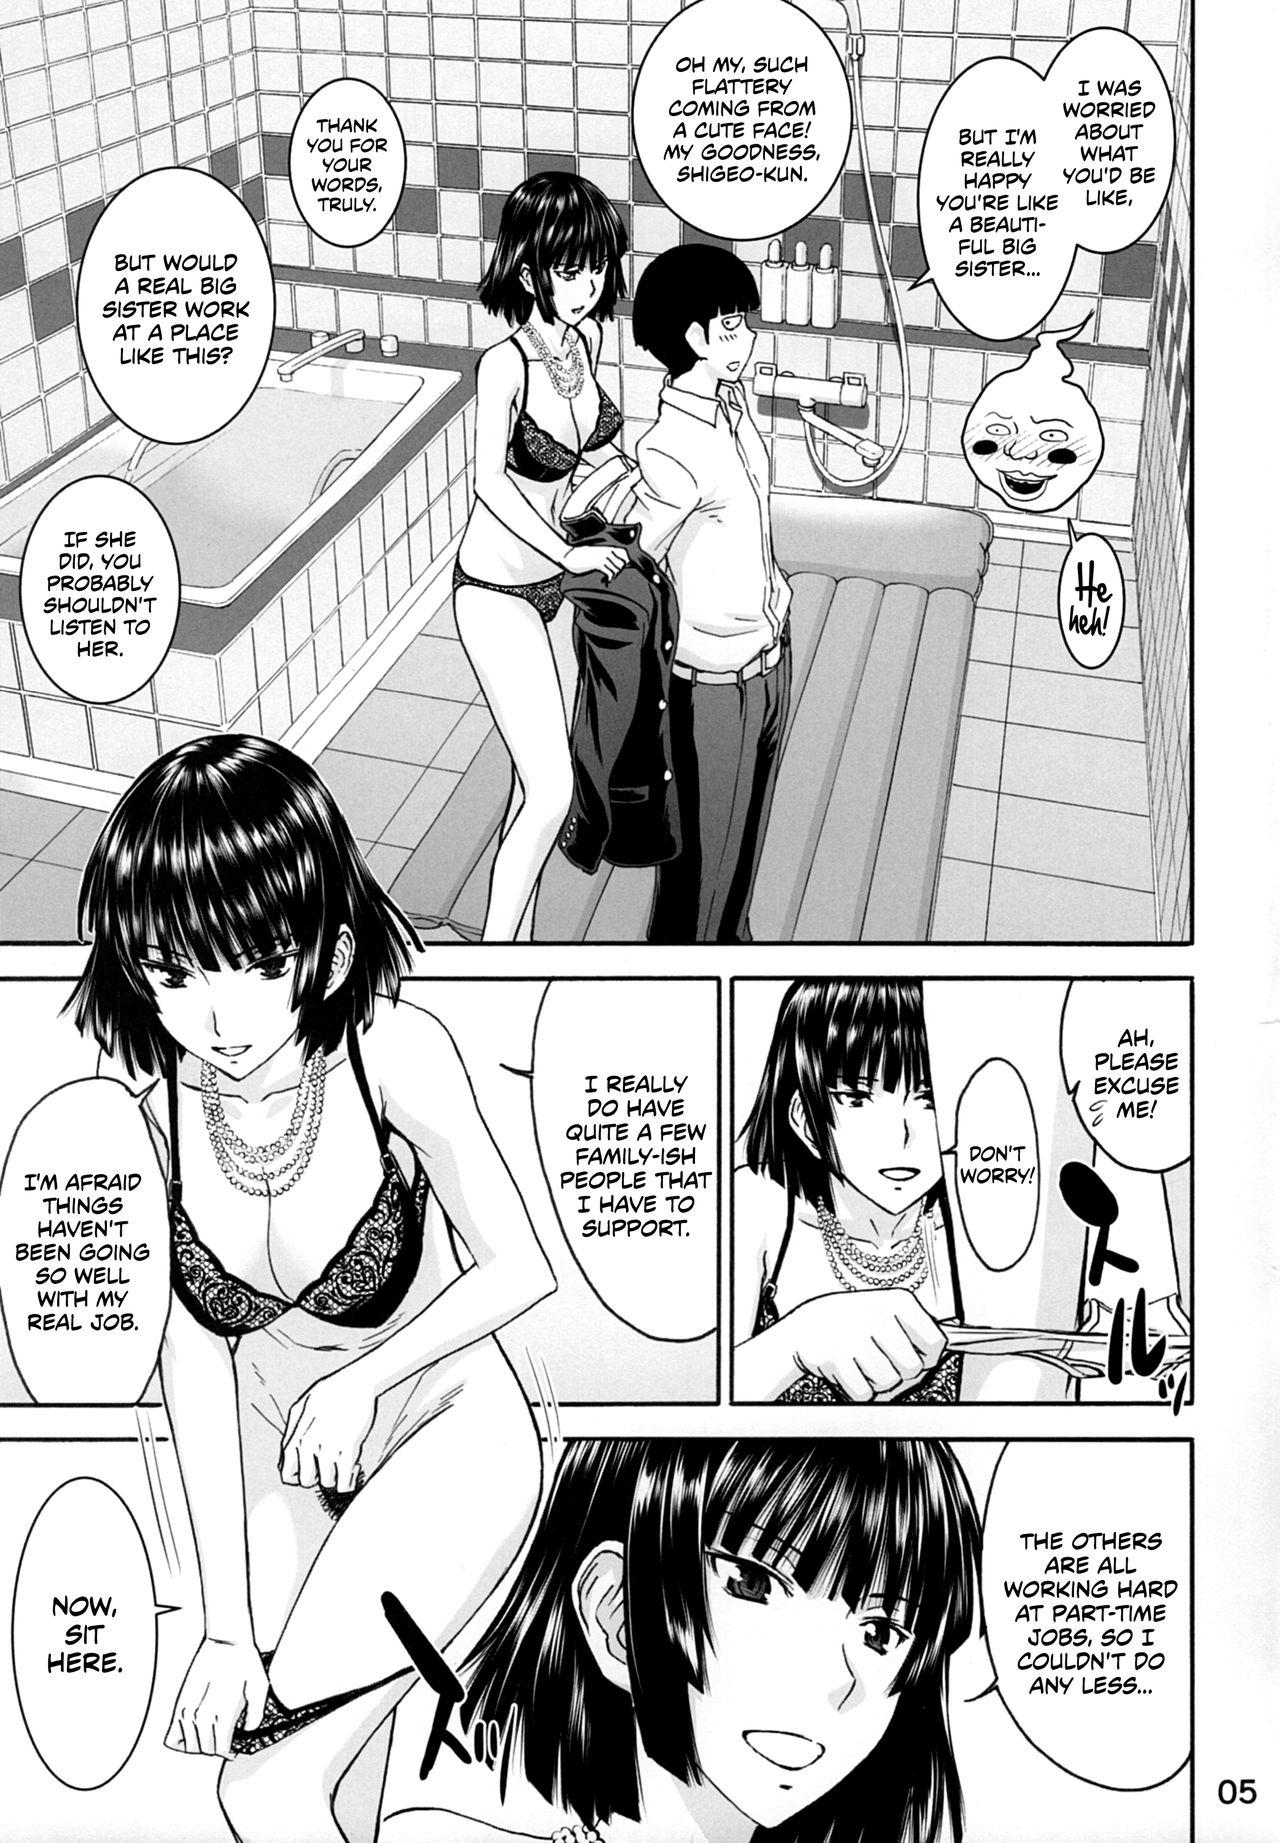 First Time (C90) [High Thrust (Inomaru)] Current B-Class Rank 1 Hero Losing Your Virginity Where Hellish Fubuki-sama Offers Her Services!! (One Punch Man, Mob Psycho 100) [English] [EHCOVE] - One punch man Mob psycho 100 Fake - Page 4